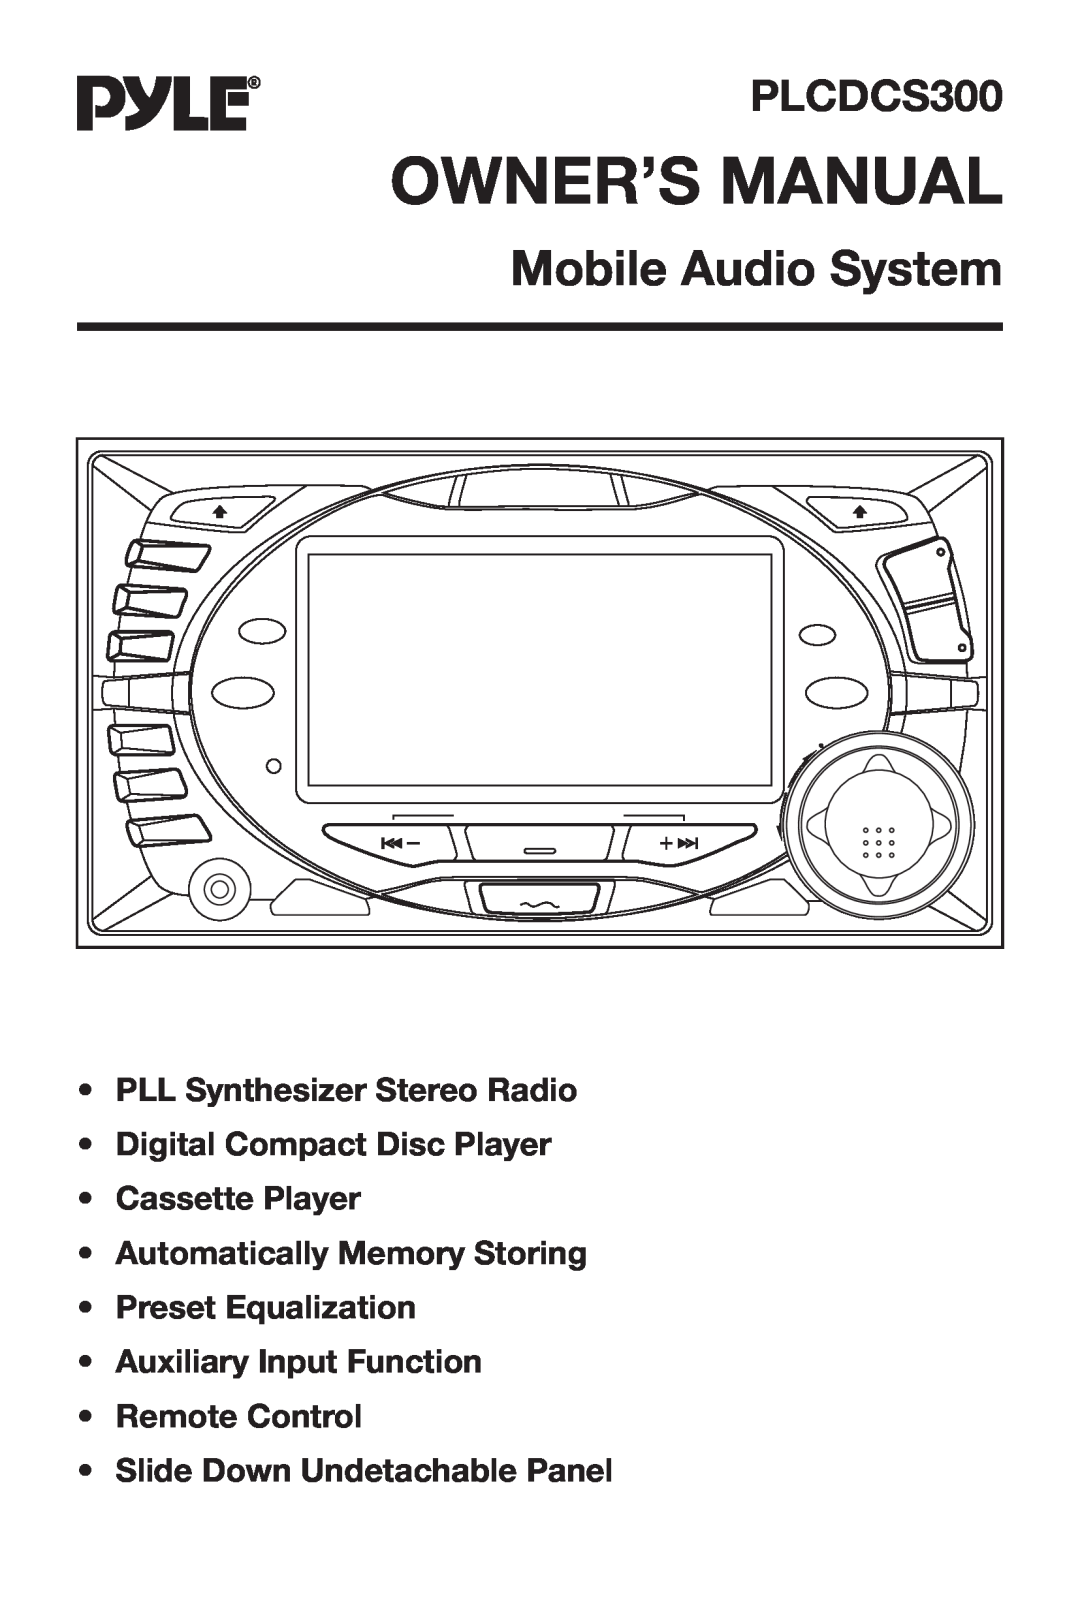 PYLE Audio PLCDCS300 owner manual PLL Synthesizer Stereo Radio, Digital Compact Disc Player Cassette Player 